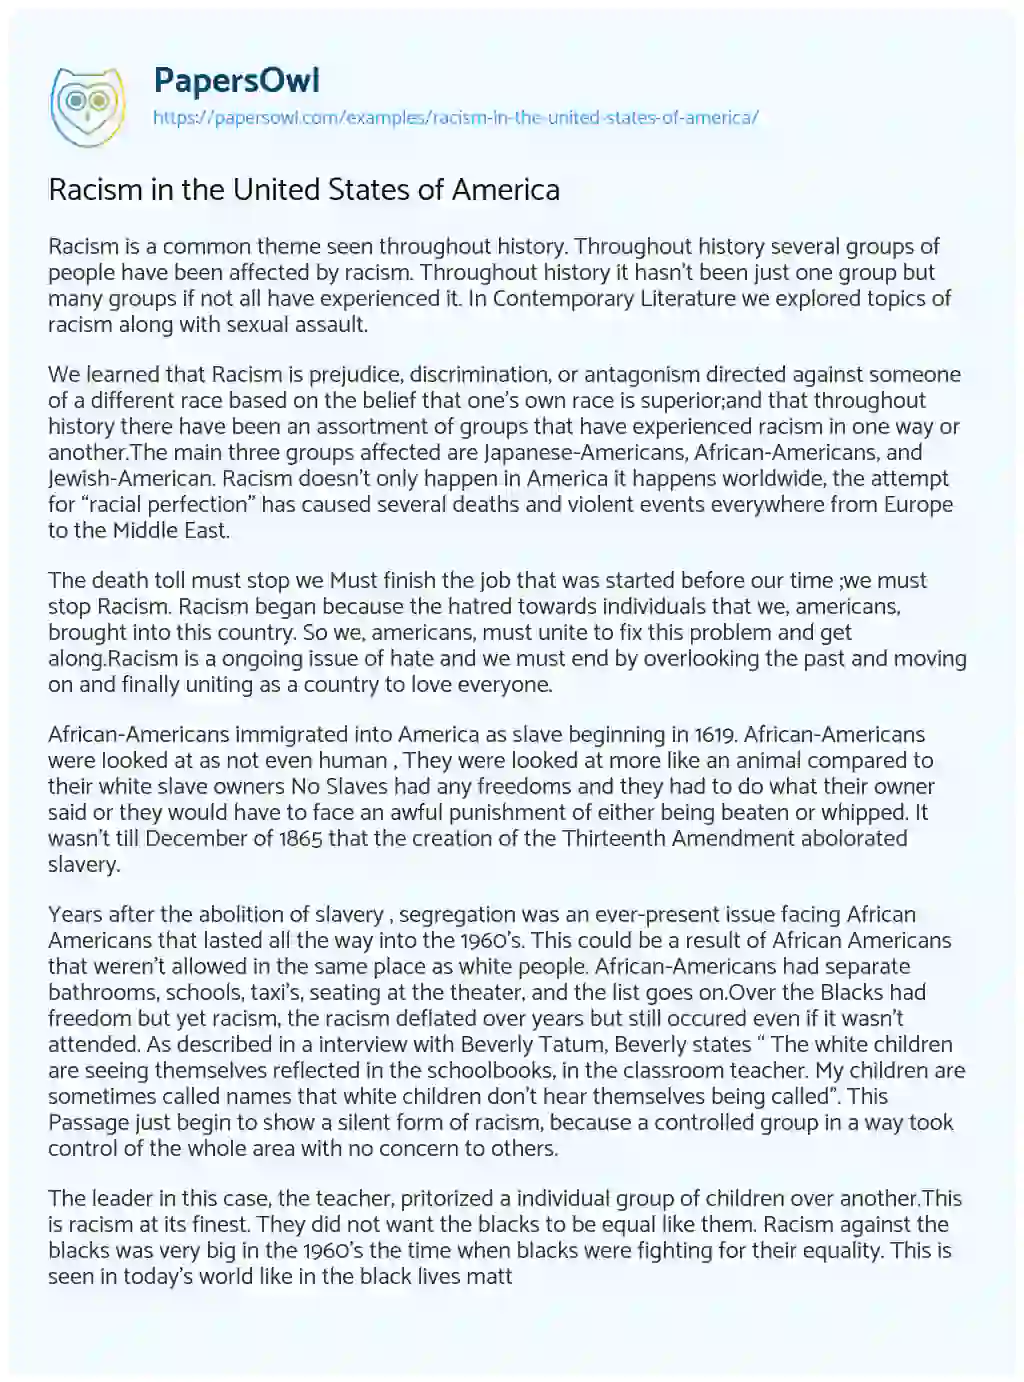 Essay on Racism in the United States of America